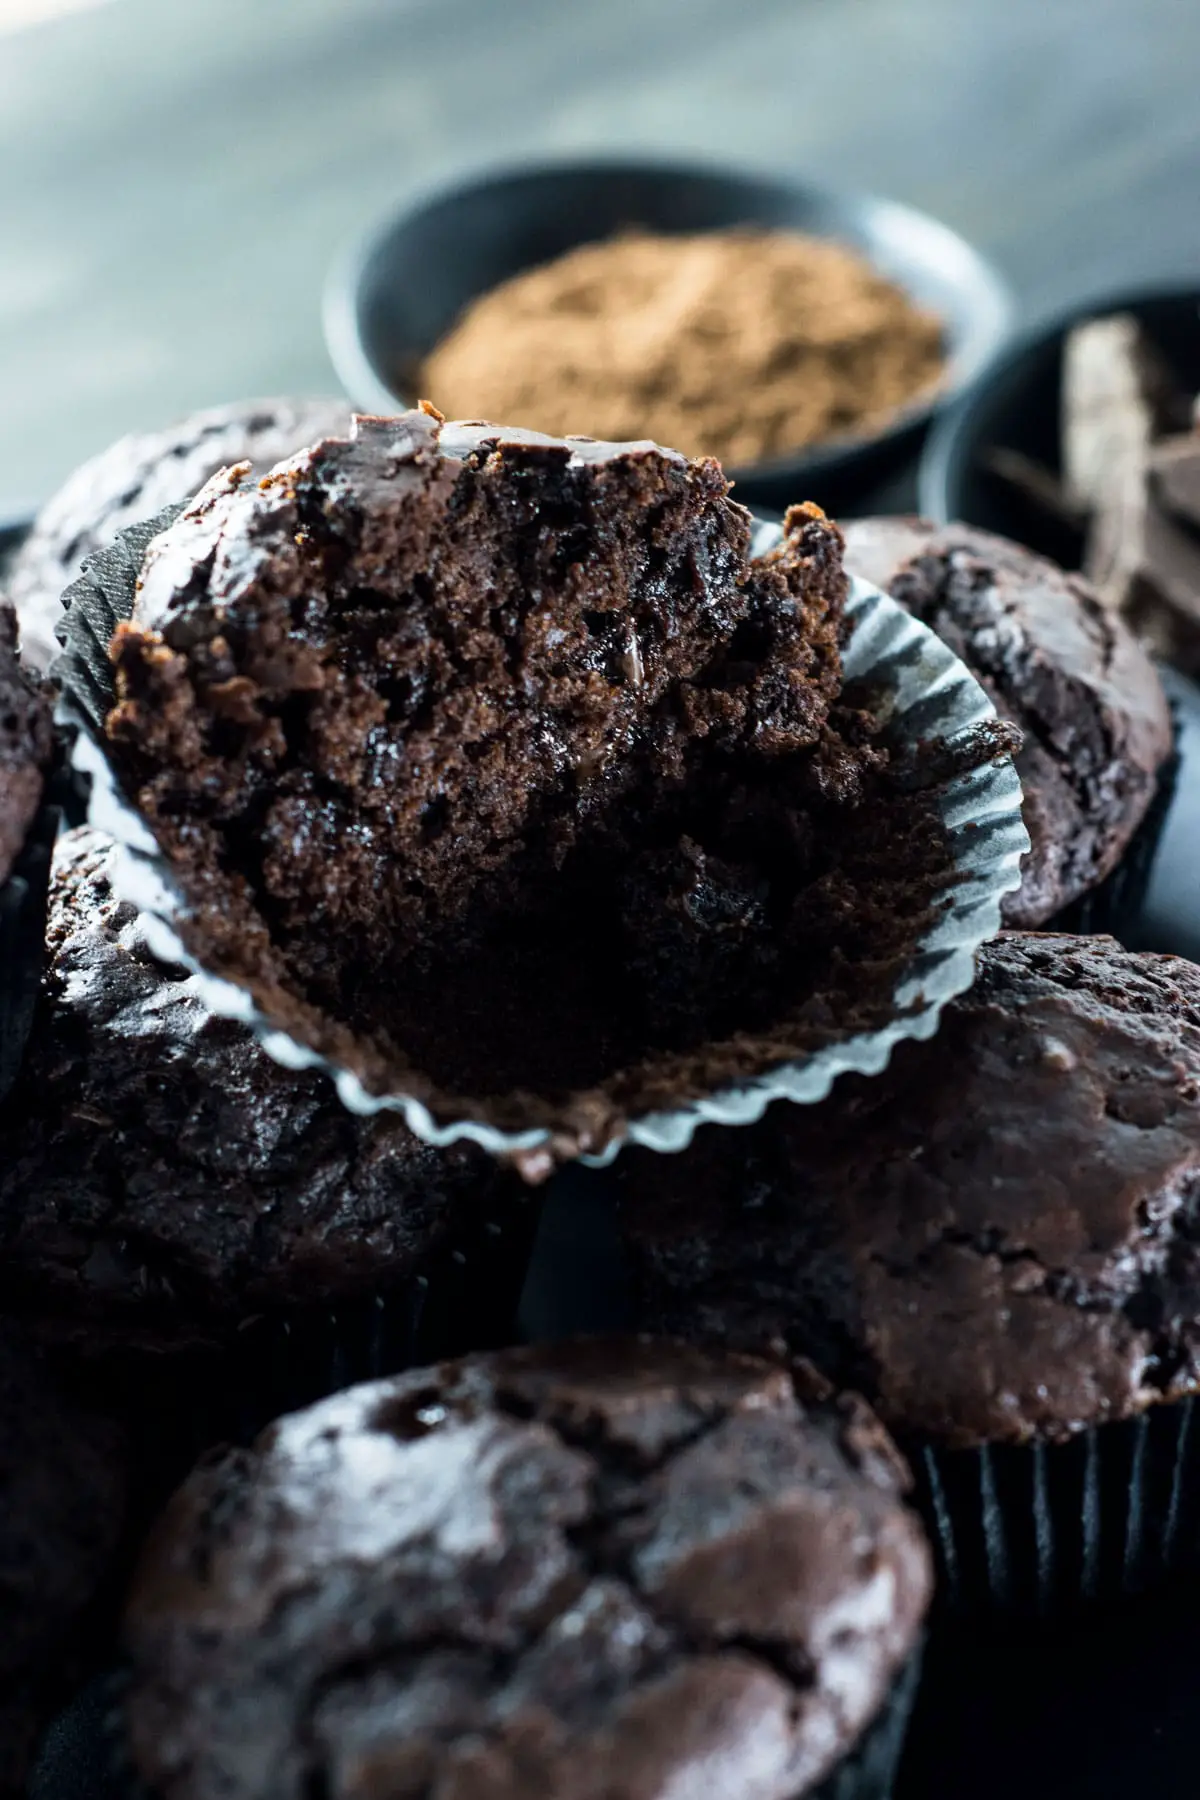 Double chocolate muffin cut in half showing moist interior